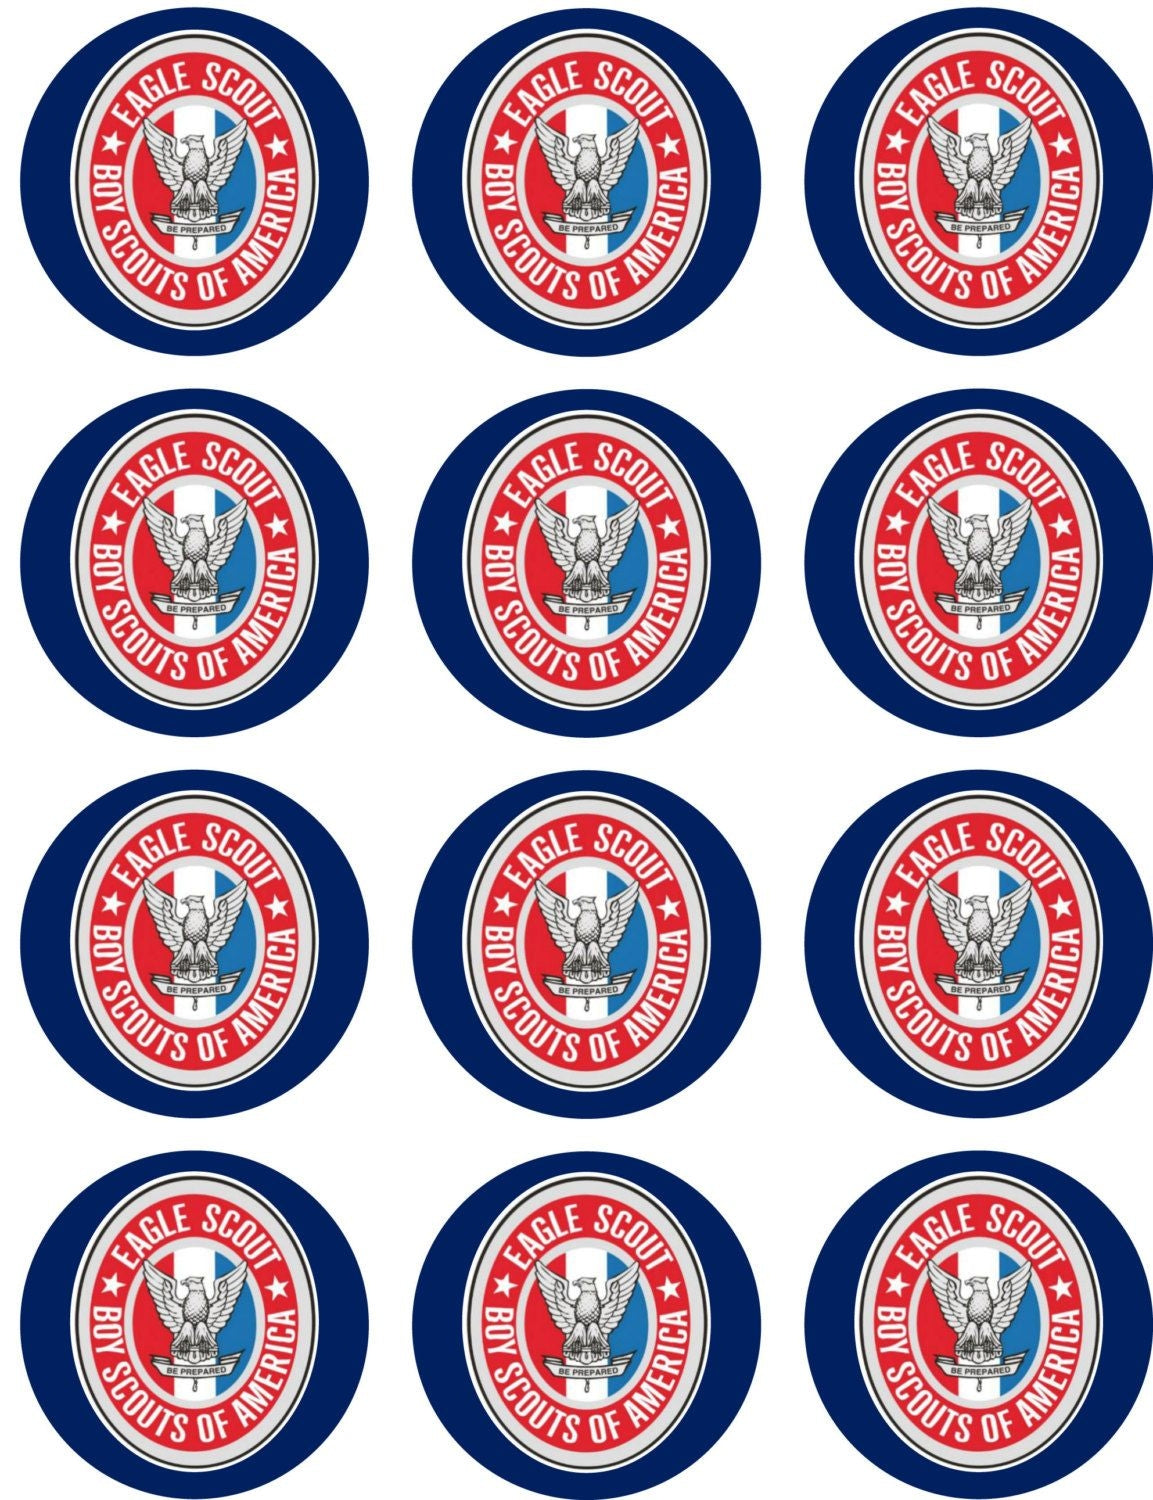 Boy Scouts of America Eagle Scout Badge Edible Cupcake Topper Images ABPID51346